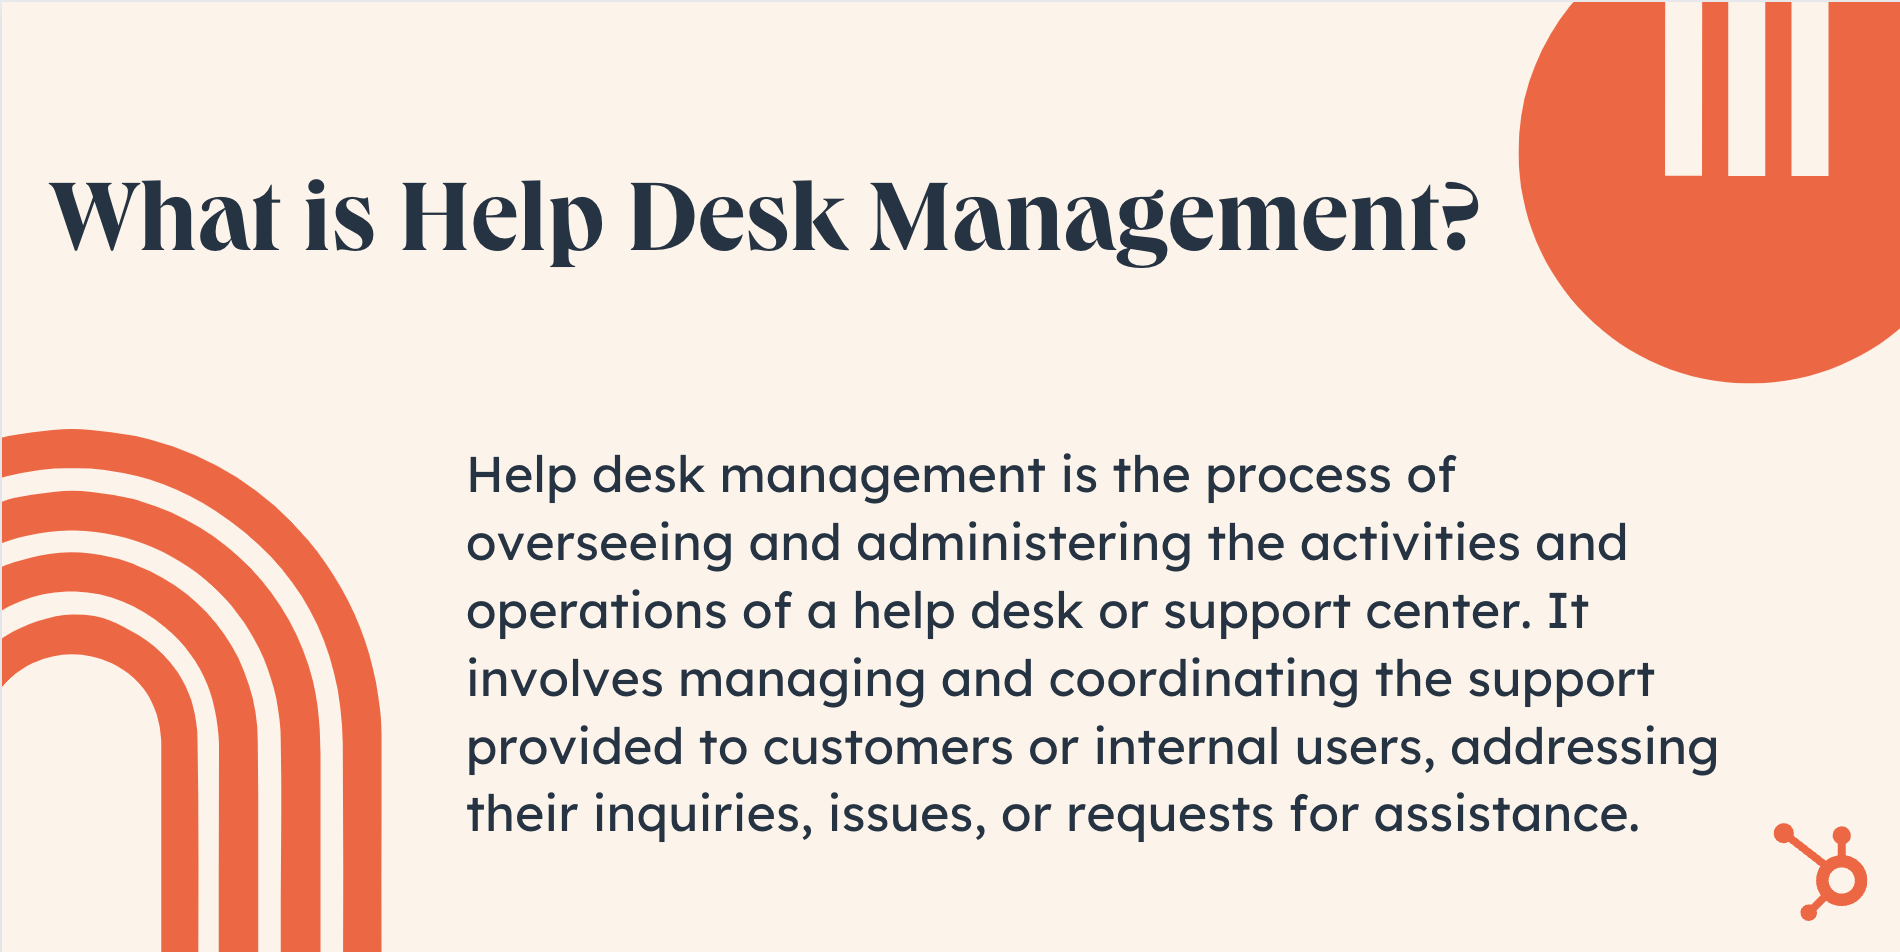 What is help desk management